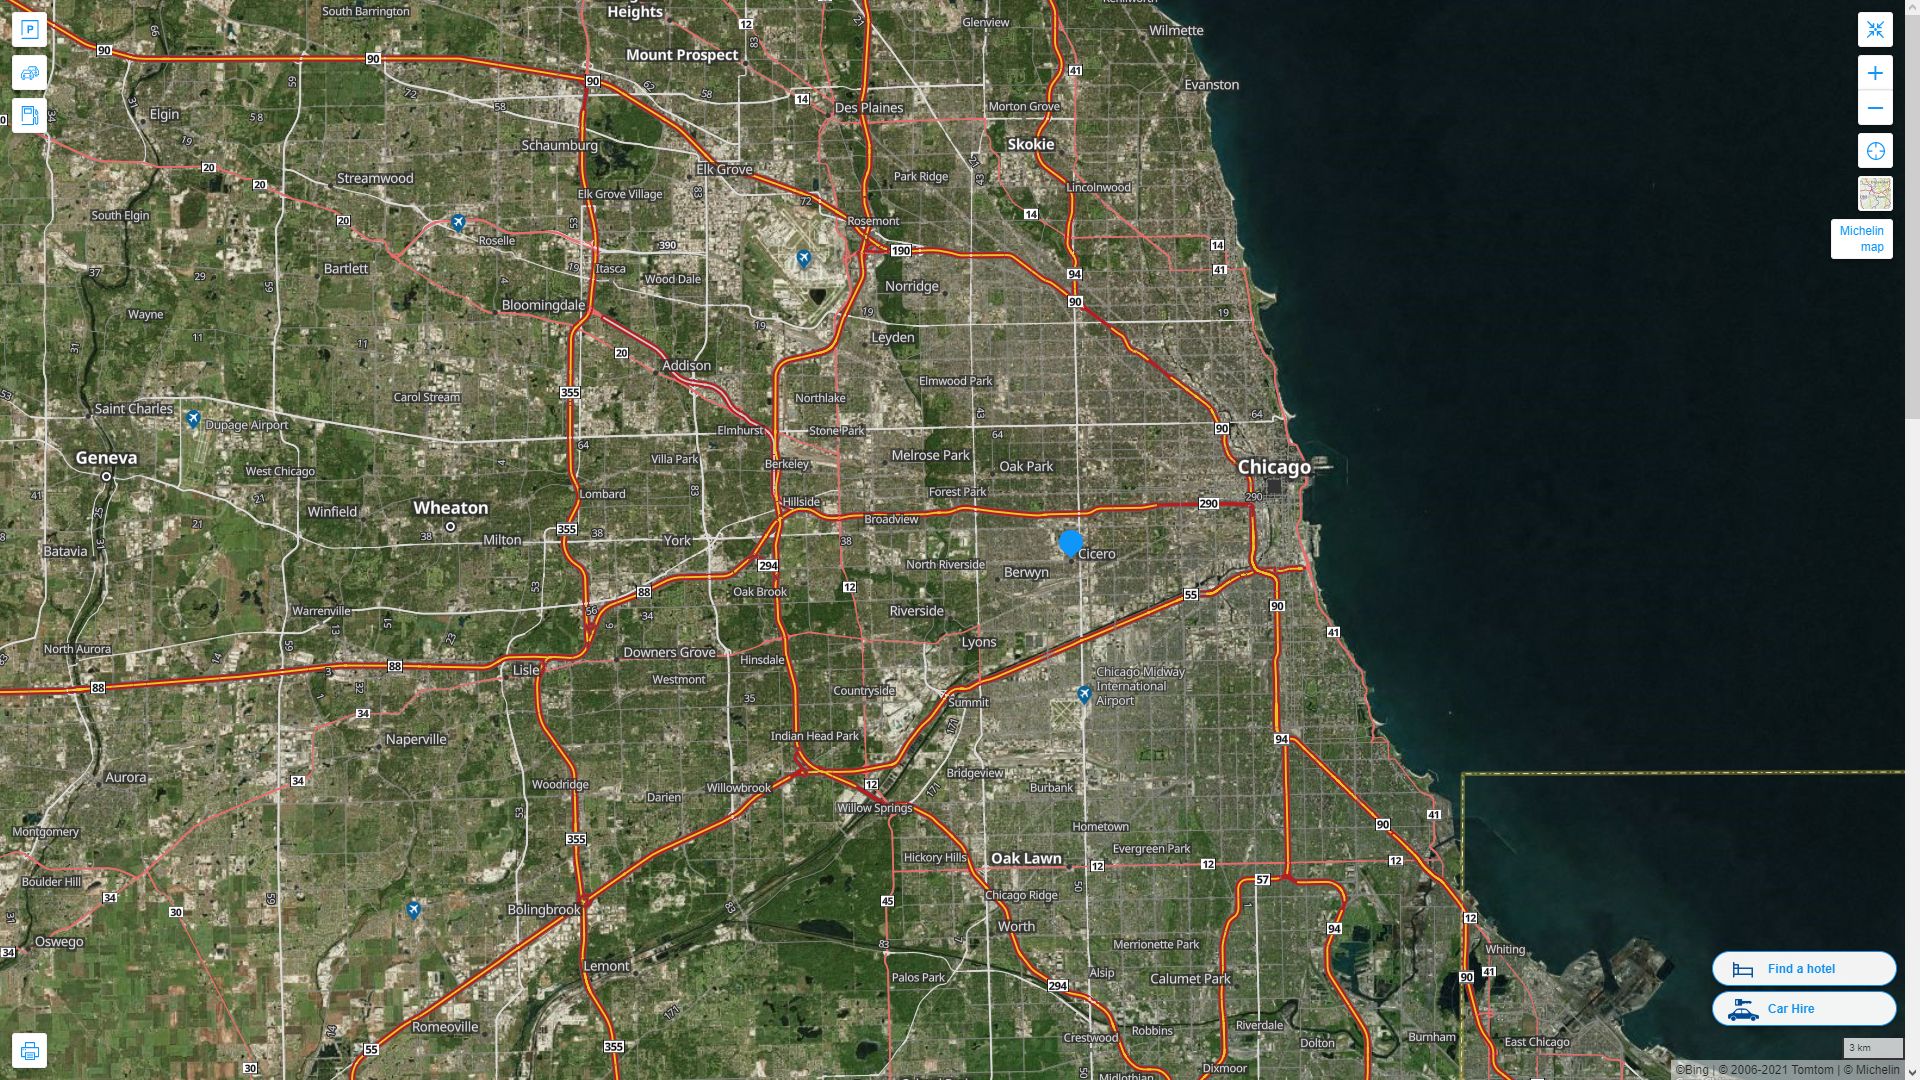 Cicero illinois Highway and Road Map with Satellite View